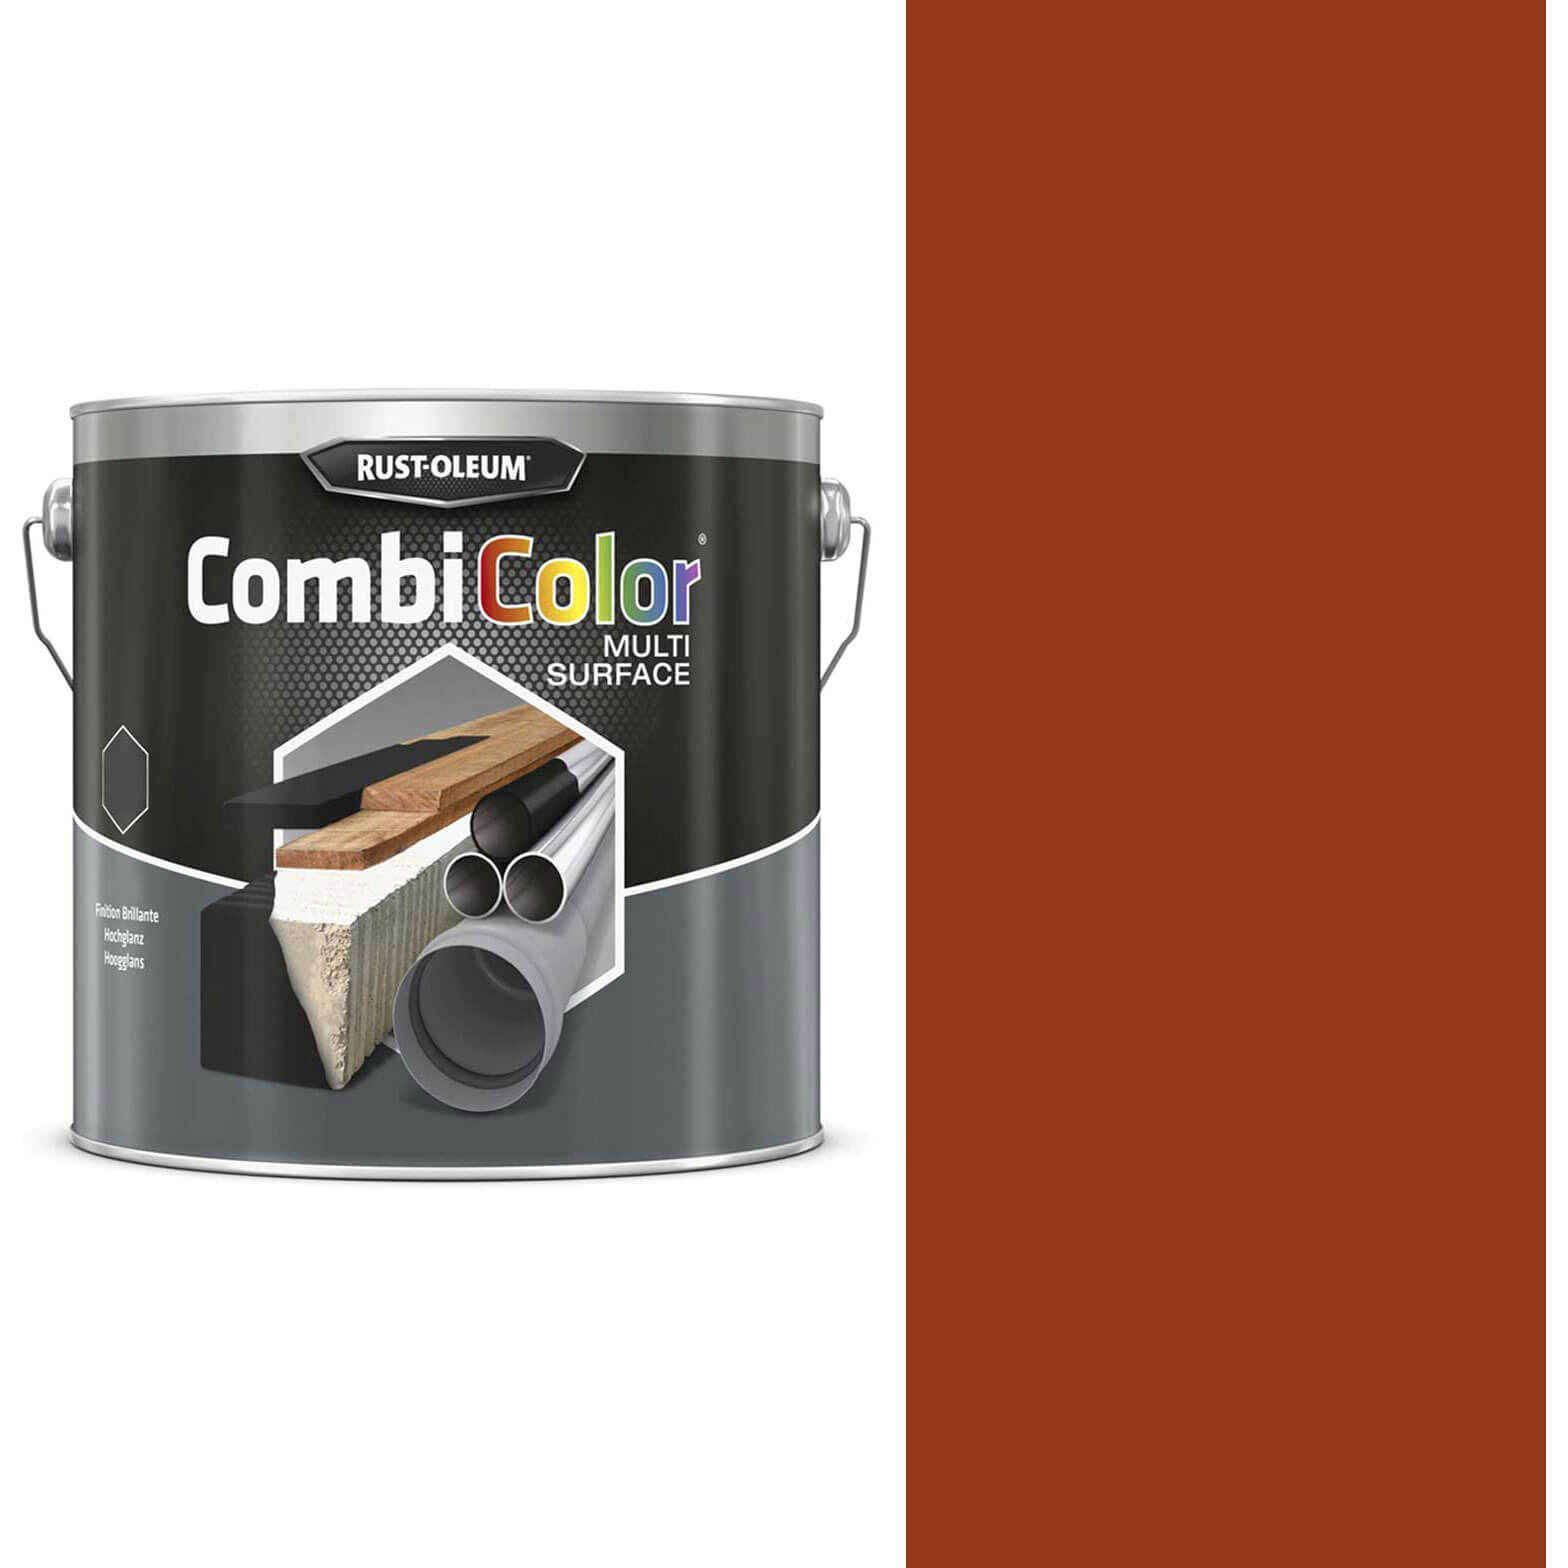 Image of Rust Oleum CombiColor Multi Surface Paint Bright Red 2.5l